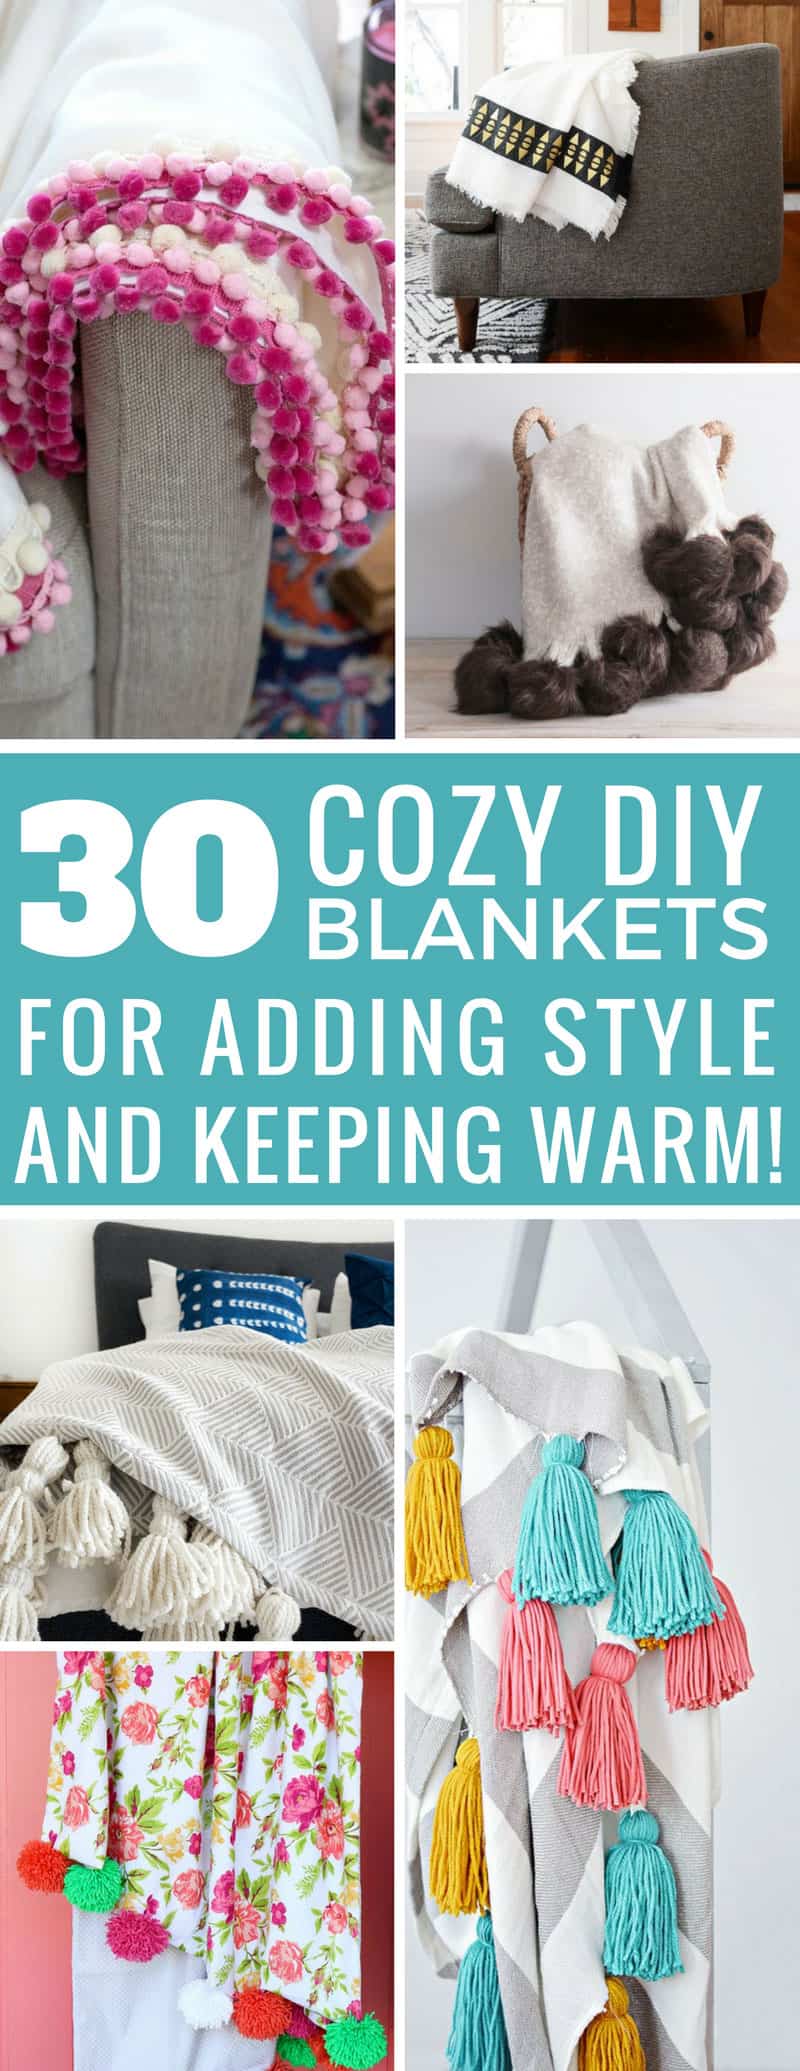 Ohh loving these easy homemade blanket ideas - now I can make my boring old throws look like the ones in the magazines! Thanks for sharing!